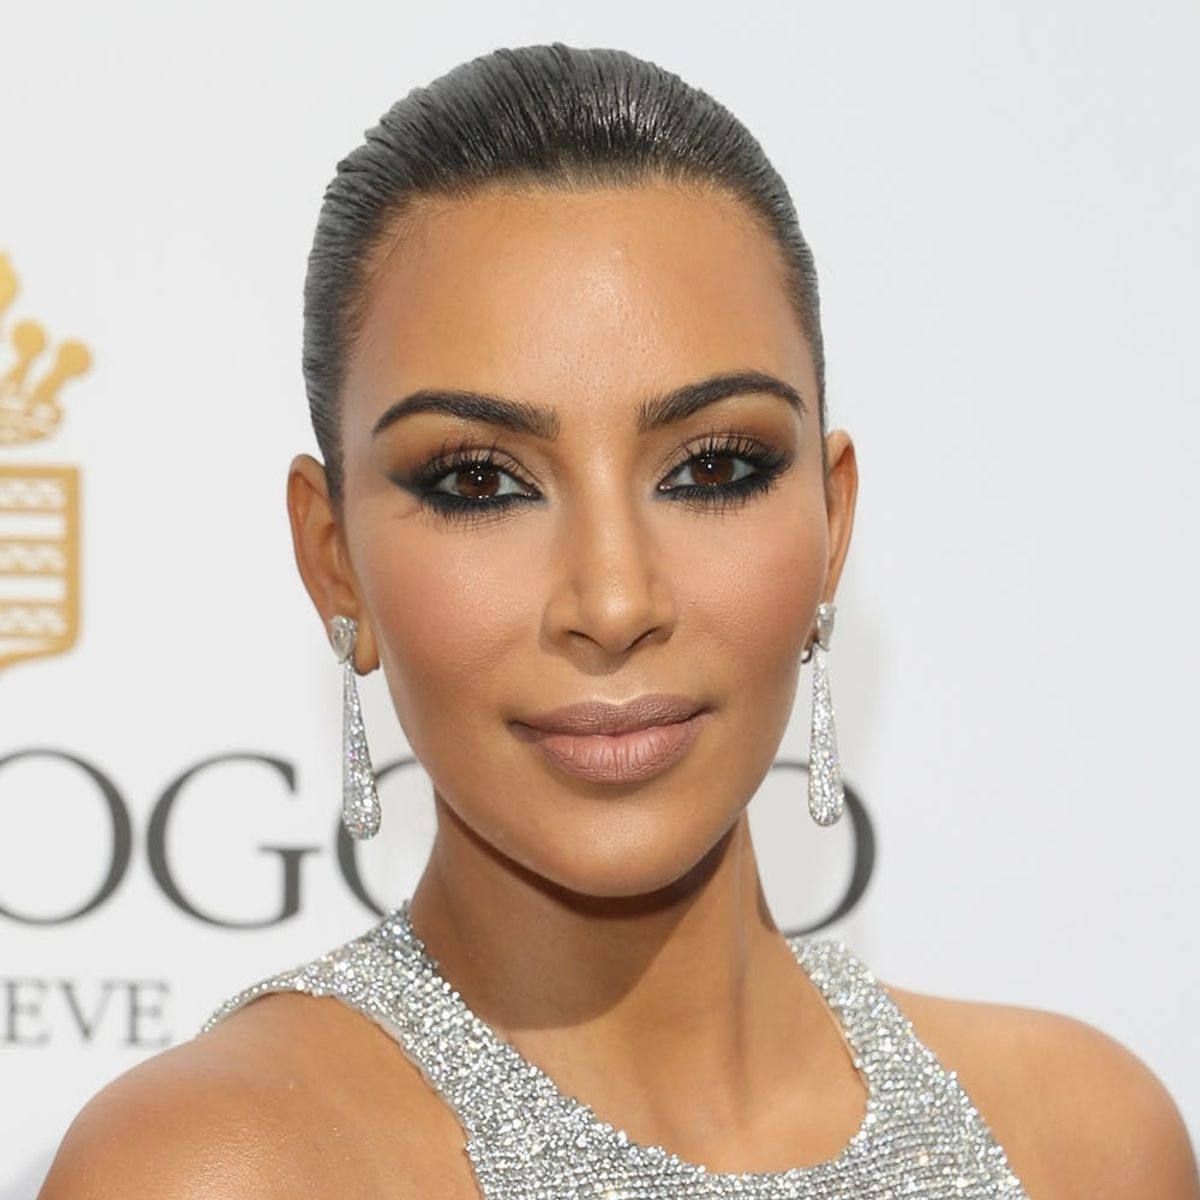 Kim Kardashian’s Latest Makeup Confession Is Her Most Unexpected Yet